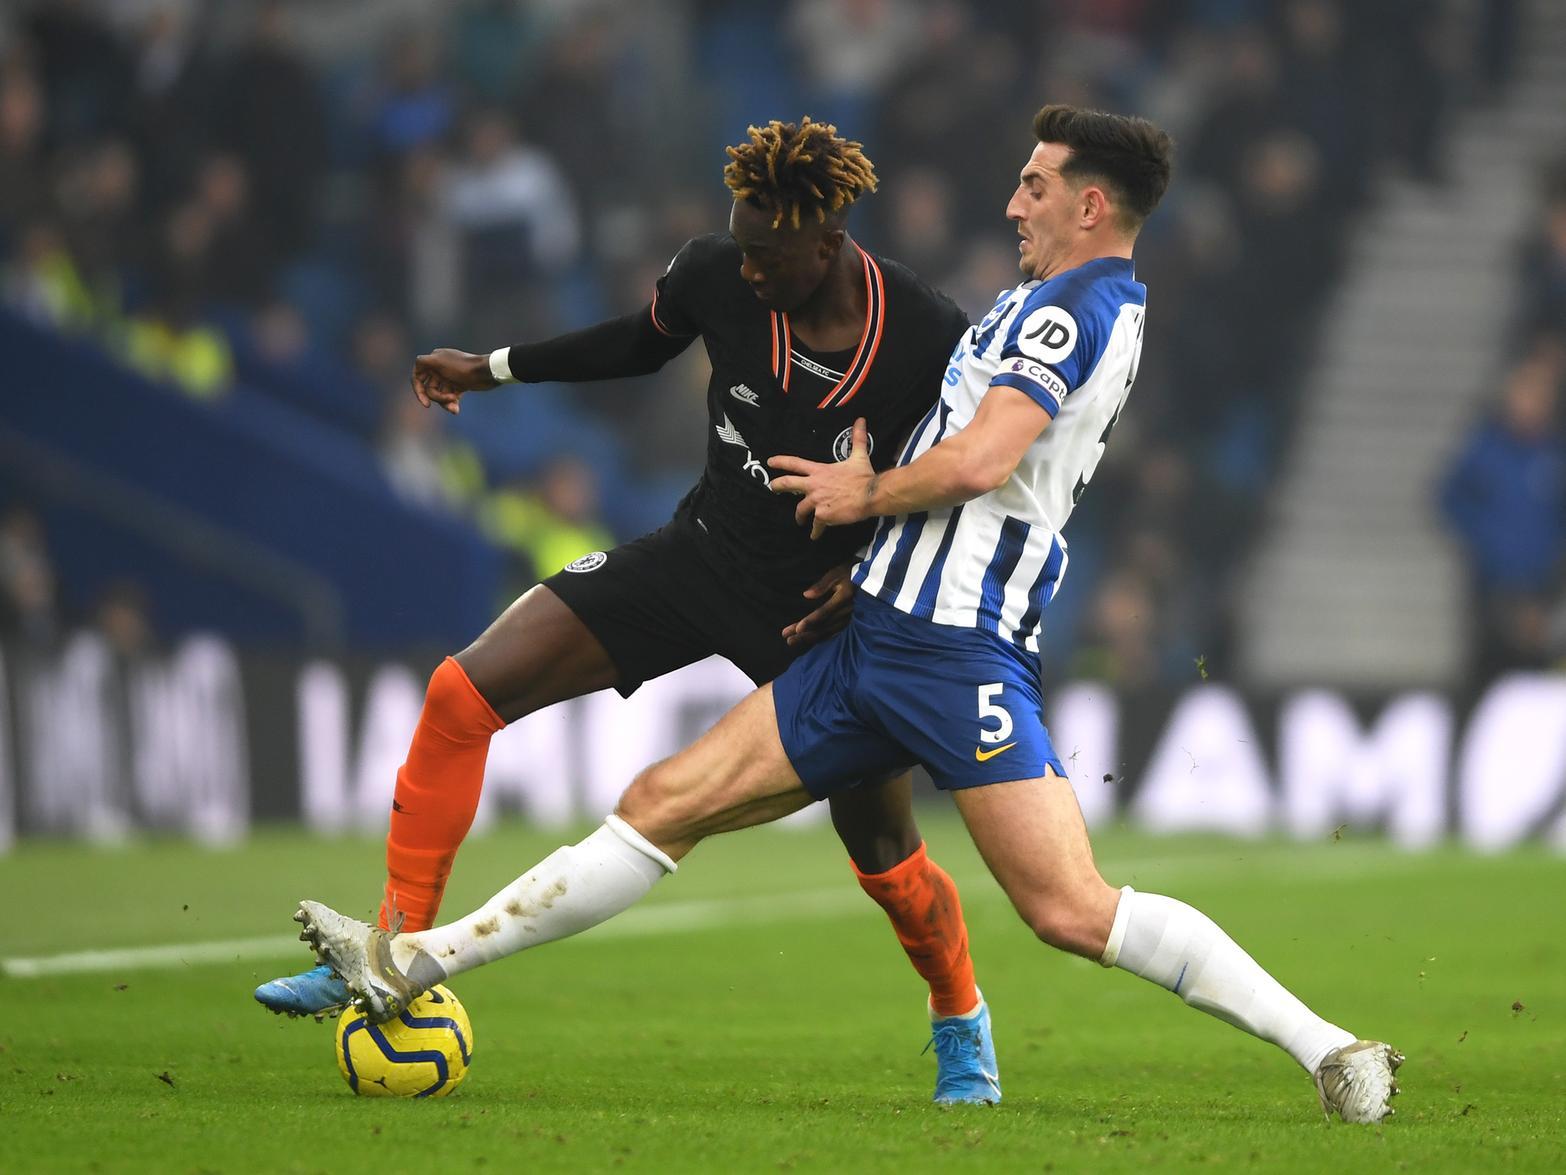 Chelsea have launched a 50m move for Brighton defender Lewis Dunk. According to The Sunday Times, the club will not stand in his way of moving to a club of Chelseas stature.